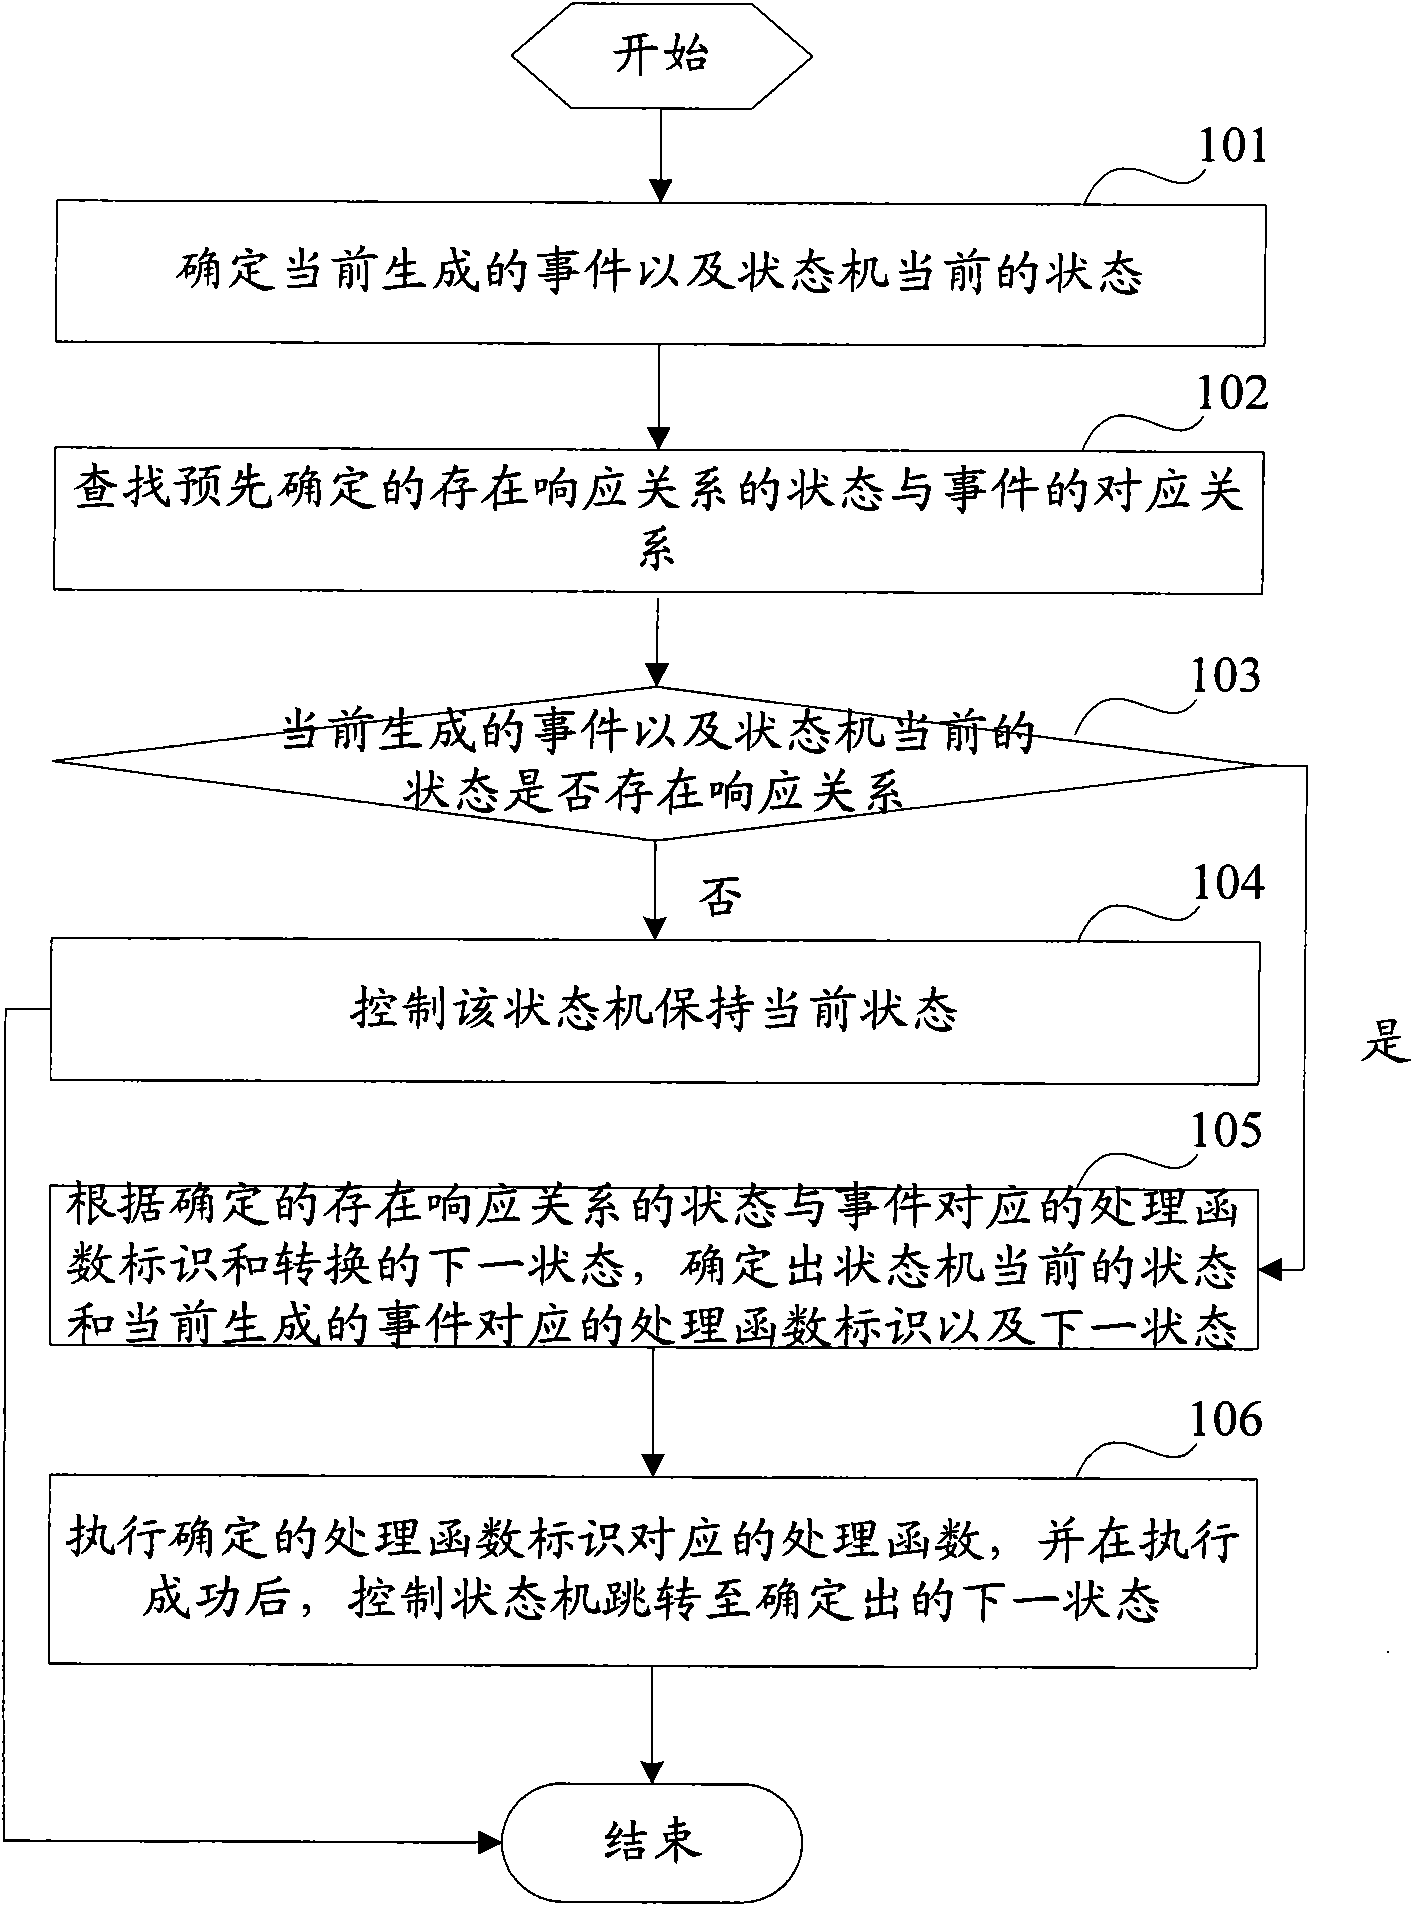 Method and device for realizing state machine